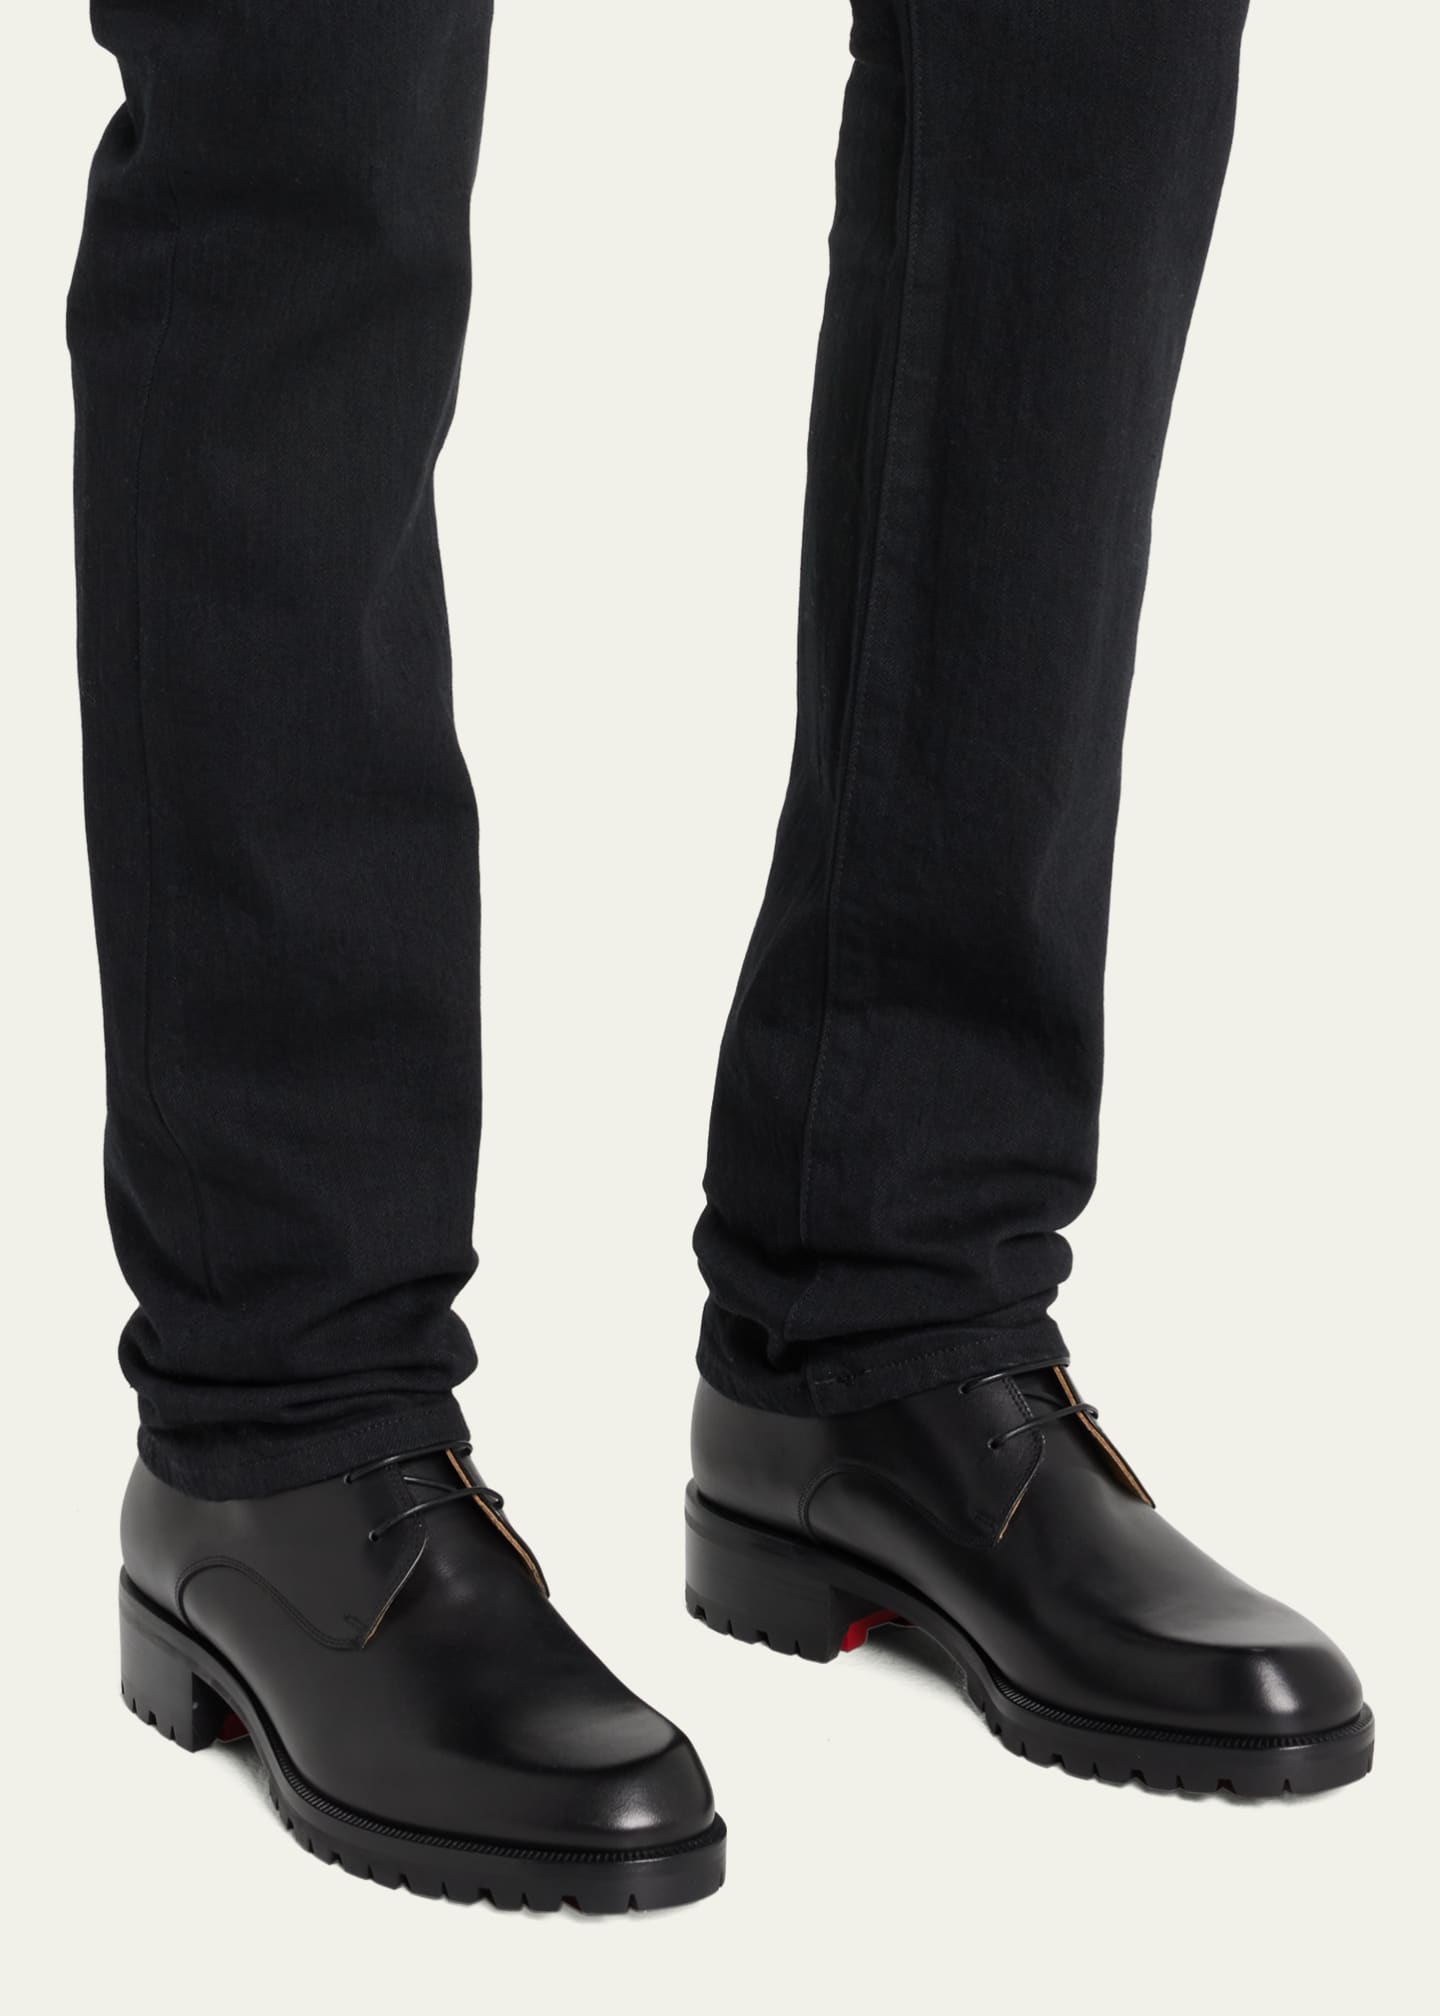 Christian Louboutin Men's Trapman Red Sole Leather Combat Boots ...